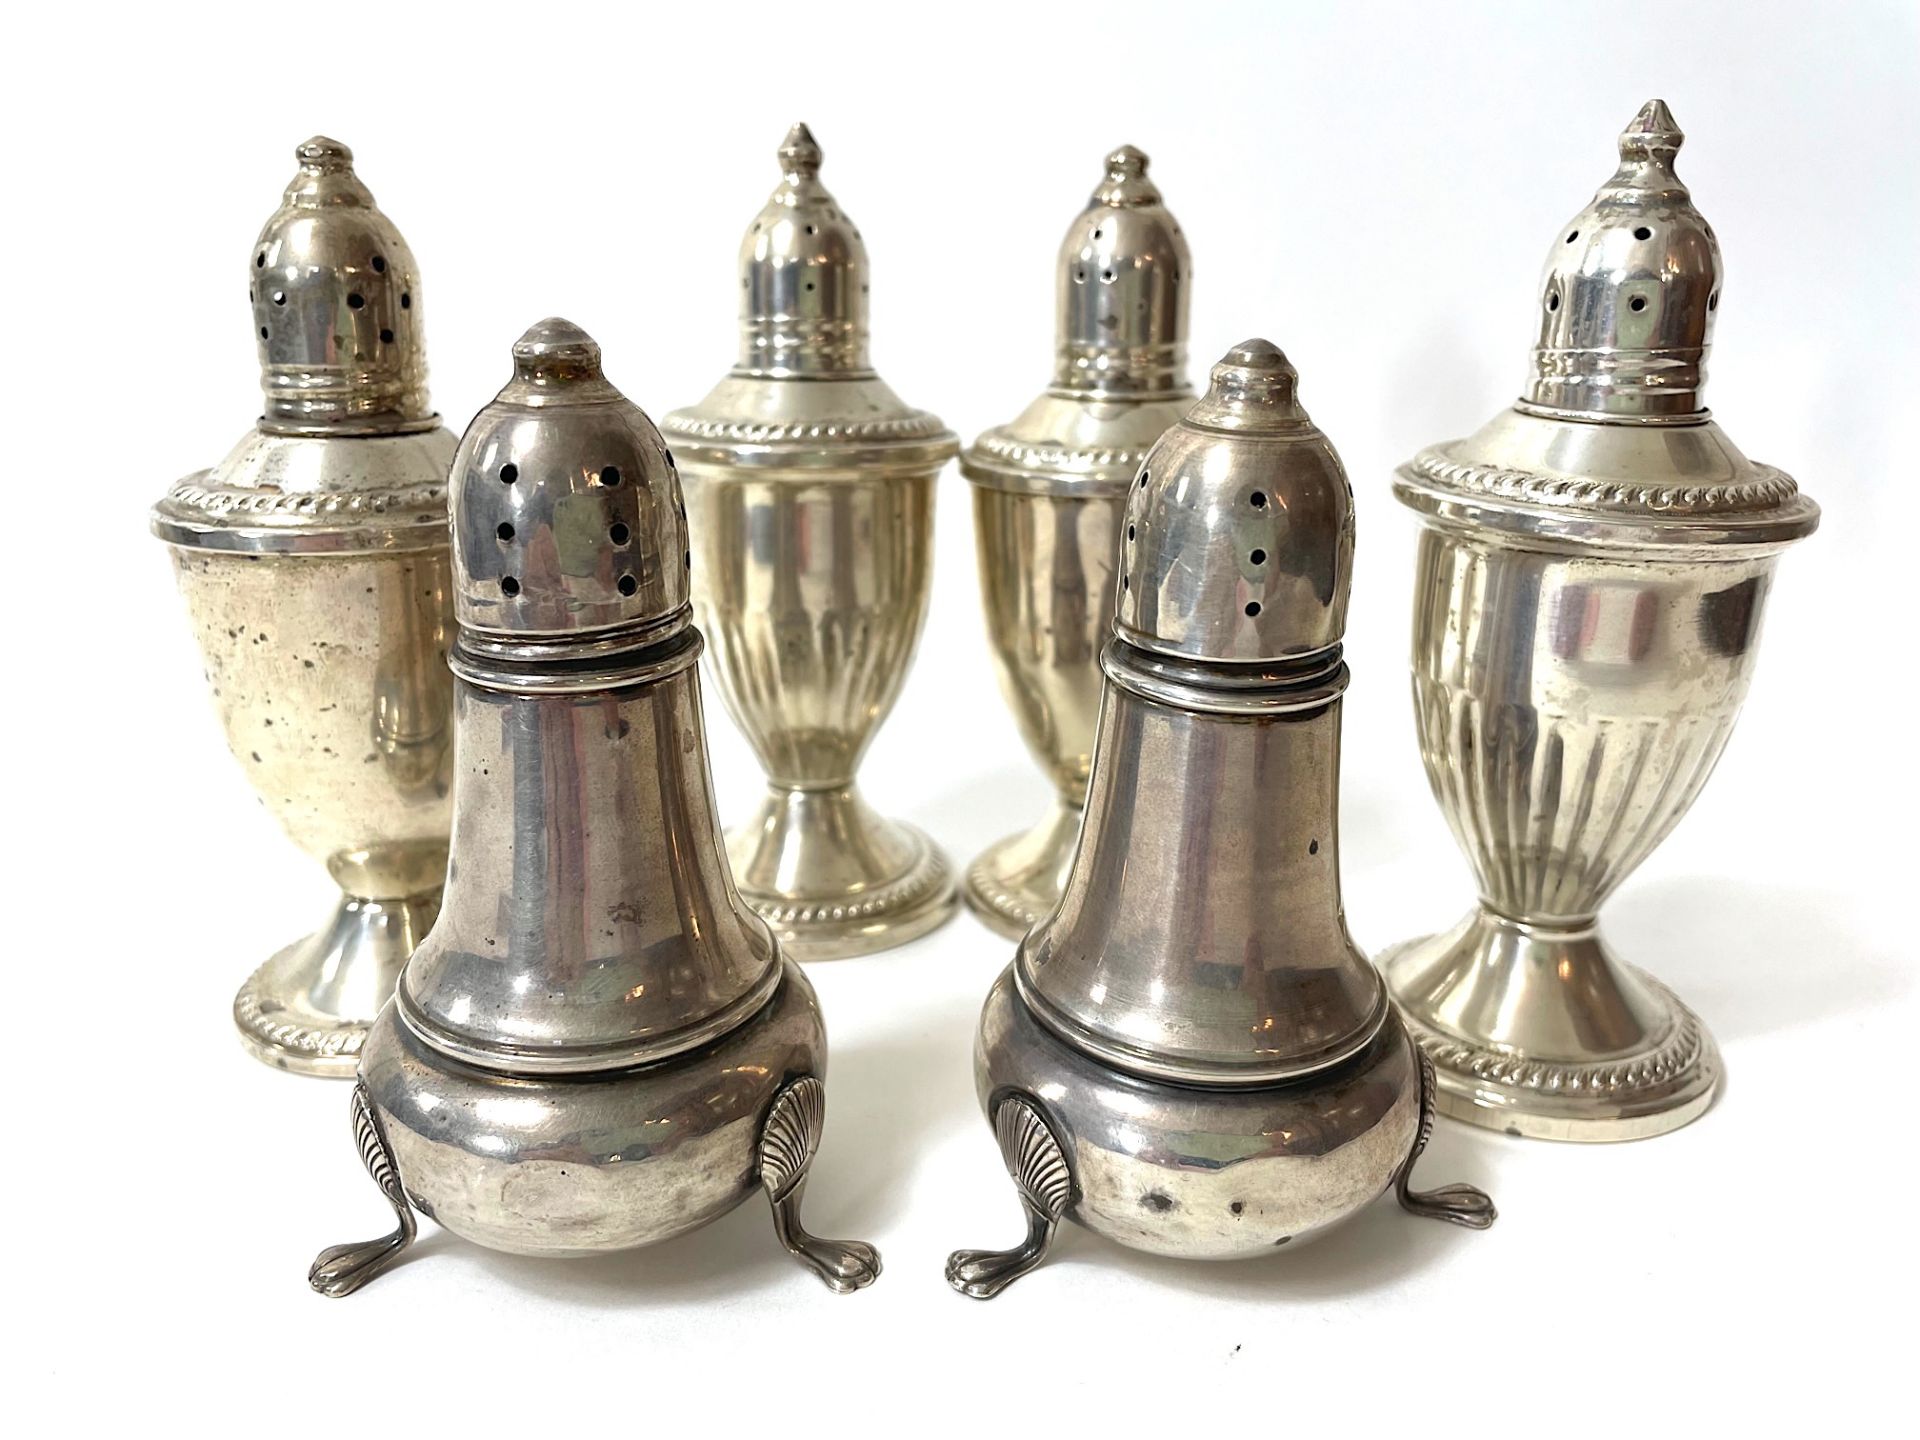 40 pairs of salt/pepper and spice shakers, - Image 78 of 88